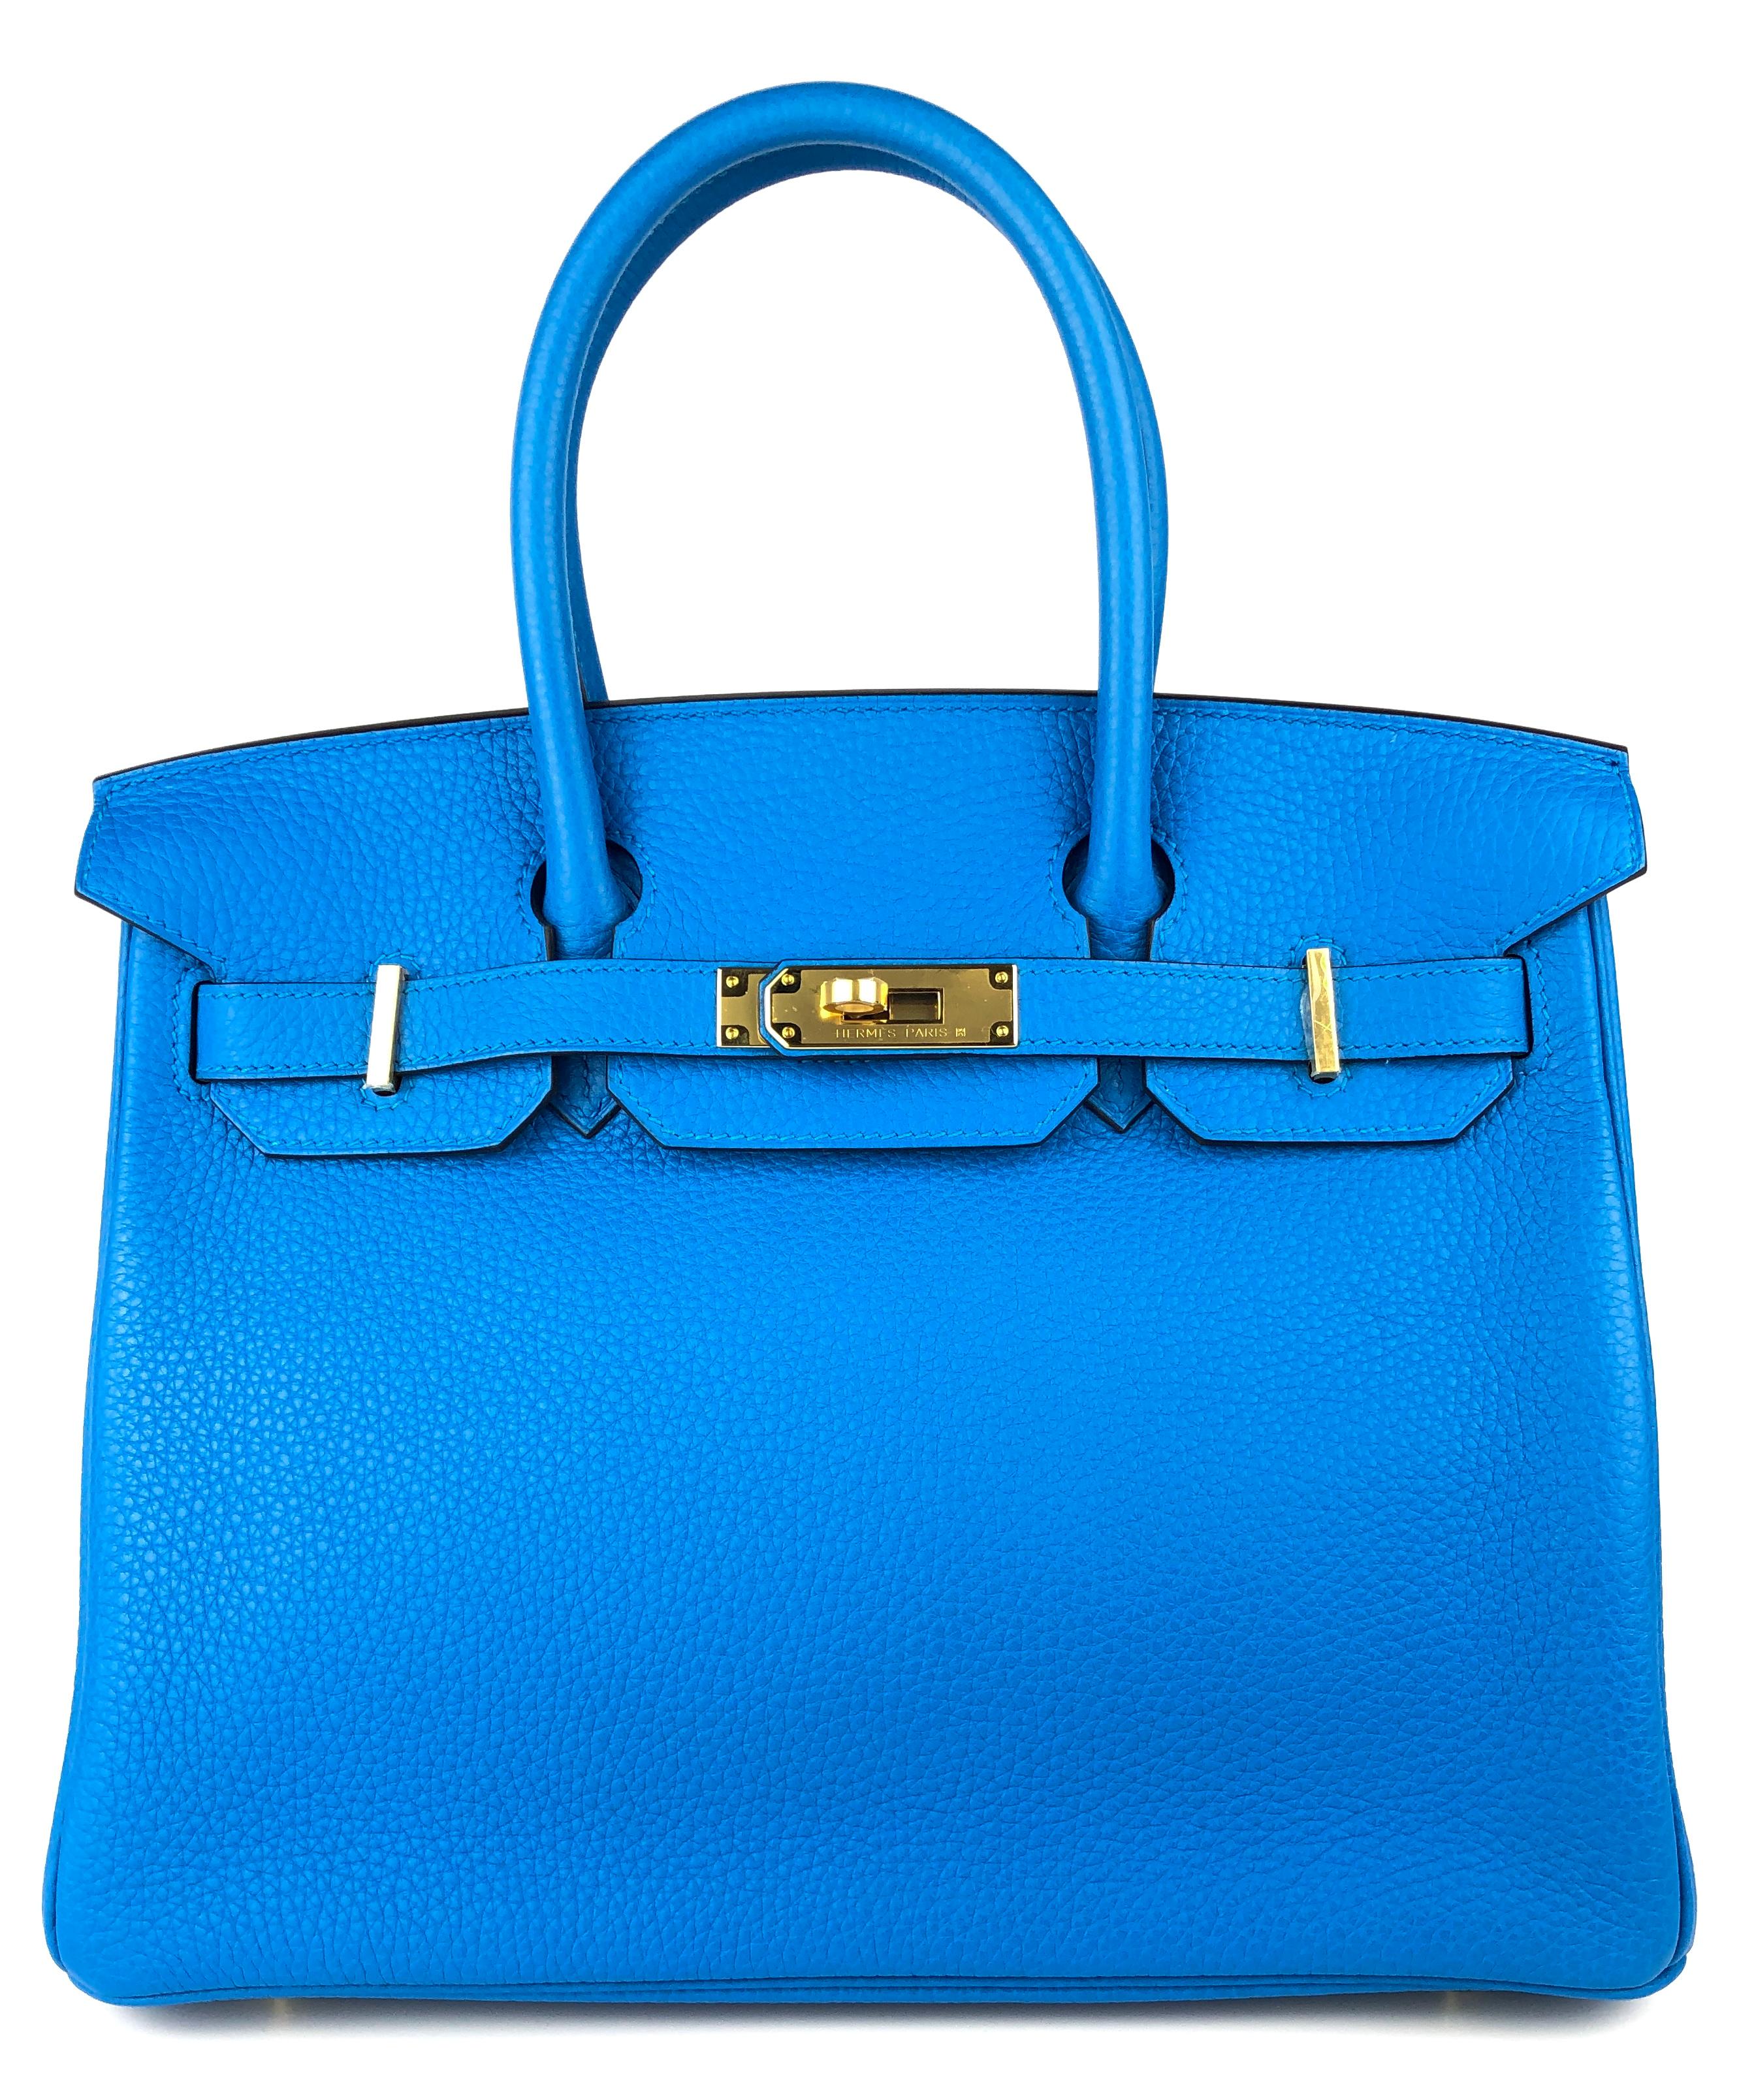 Ultra Rare Absolutely Stunning Hermes Birkin 30 Blue Zanzibar Togo Leather, Complimented by Gold Hardware. Pristine Condition with Plastic on all Hardware. Only Carried 2 Times! 

Please keep in mind that this is a pre owned item, the bag has been